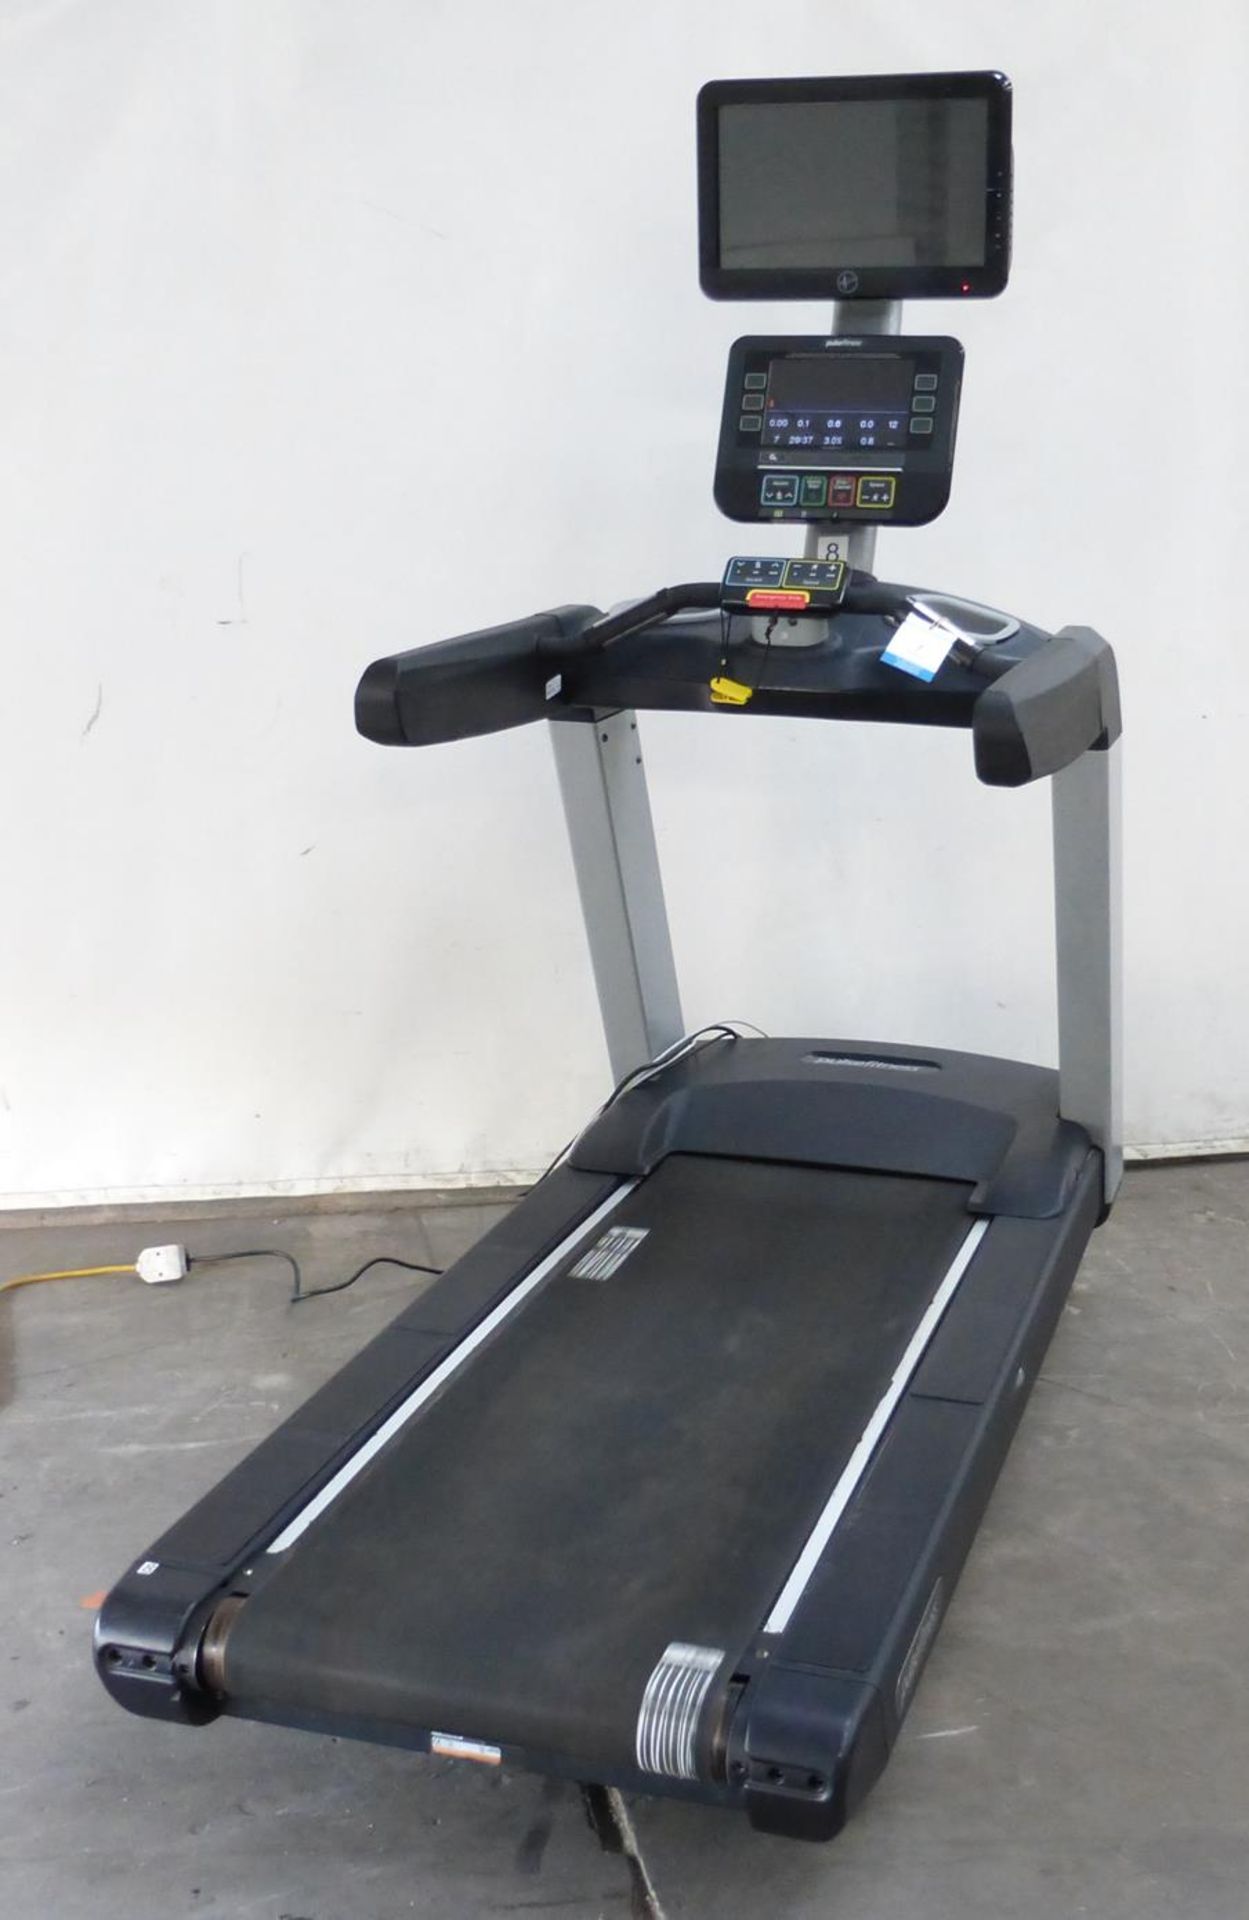 * A Pulse Fitness 260G Treadmill Complete with Apple & Android Dock, Monitor & Heart Rate Sensor.